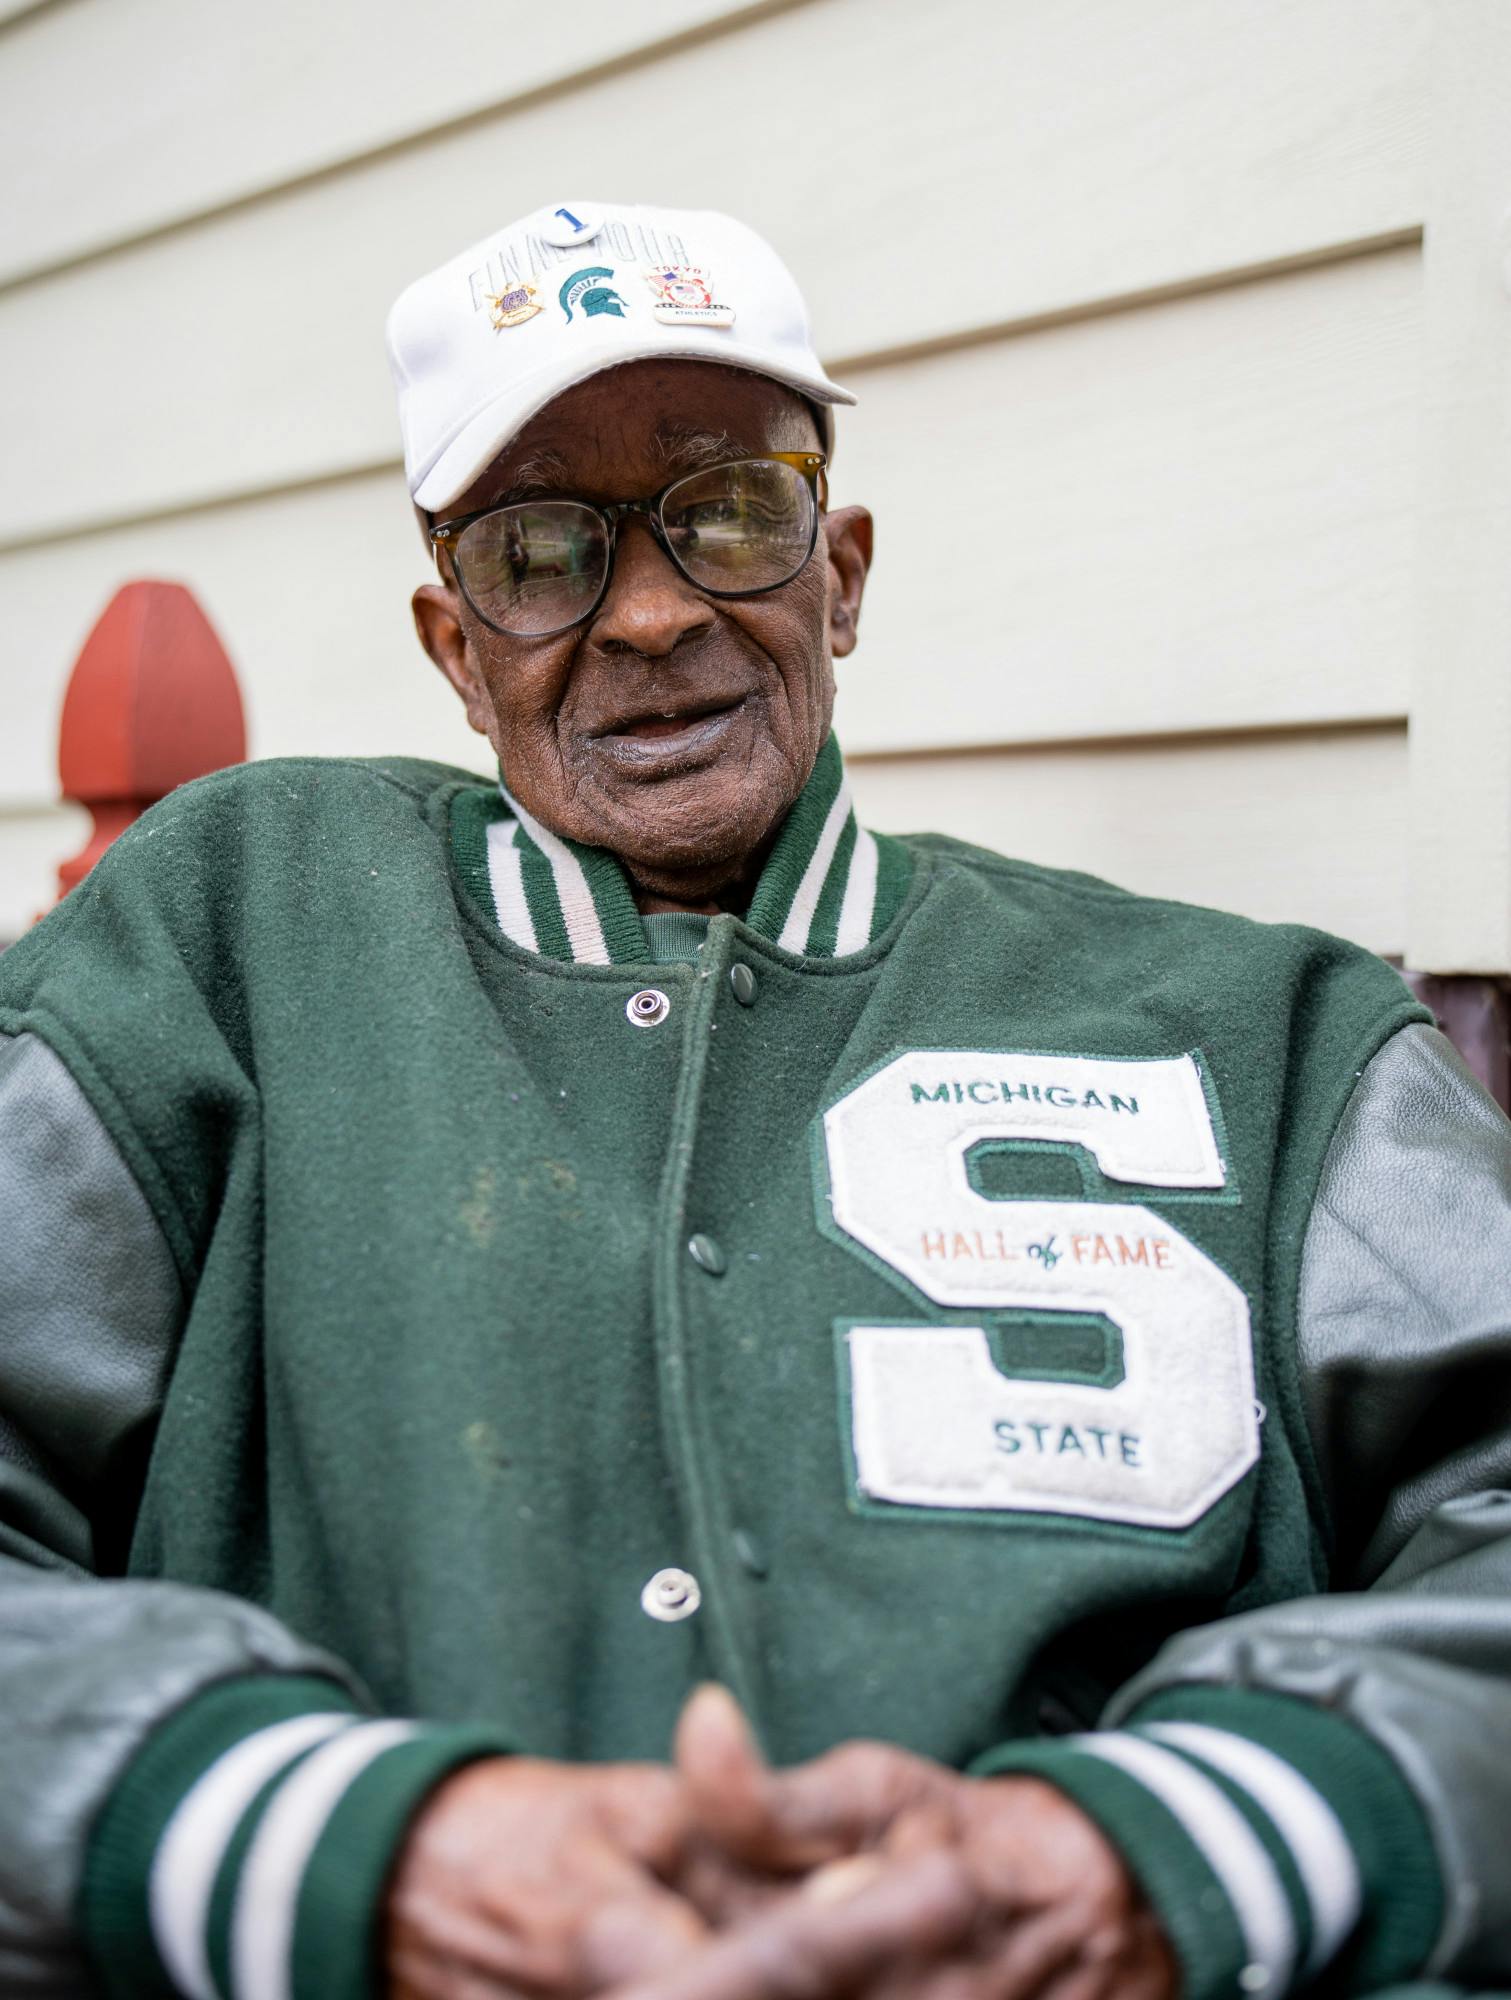 Homecoming Grand Marshal James E. Bibbs sits outside of his home in East Lansing, MI on Oct. 13, 2022. Bibbs was the first Black head coach at Michigan State University when he started in 1968, as well as the first Black head track coach in the Big Ten. 

As a coach he helped his athletes, some of whom became Olympians, toward 52 Big Ten titles and 26 All-American letters. As a runner he tied Jesse Owen's world record in the 60-yard dash in 1951.